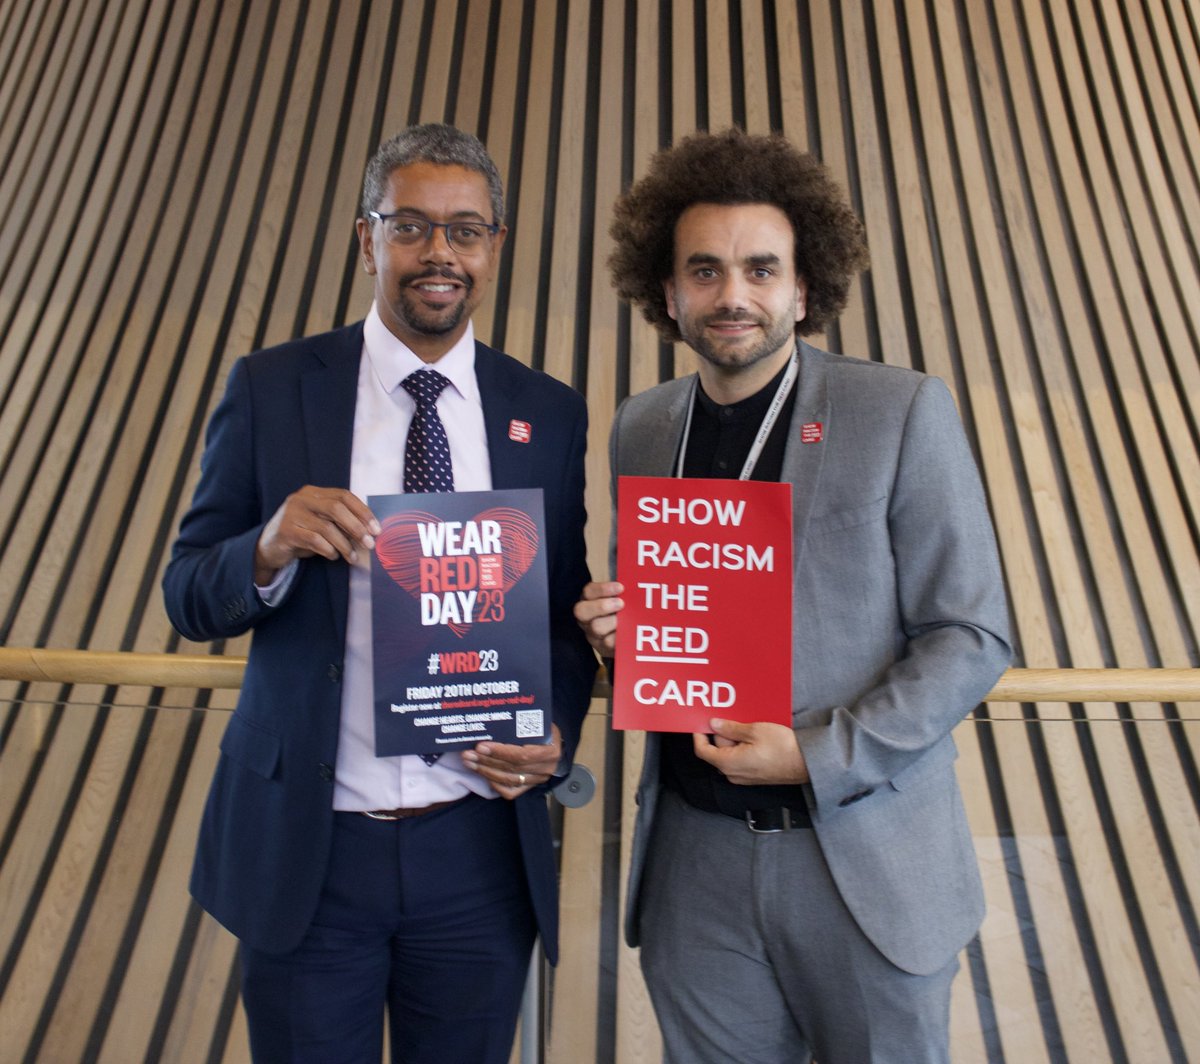 Congratulations @vaughangething on being elected as leader of @WelshLabour. Vaughan has been a supporter of @theredcardwales for many years, we’re looking forward to continuing to work closely with @WelshGovernment on their vision of an anti-racist nation. #ShowRacismtheRedCard